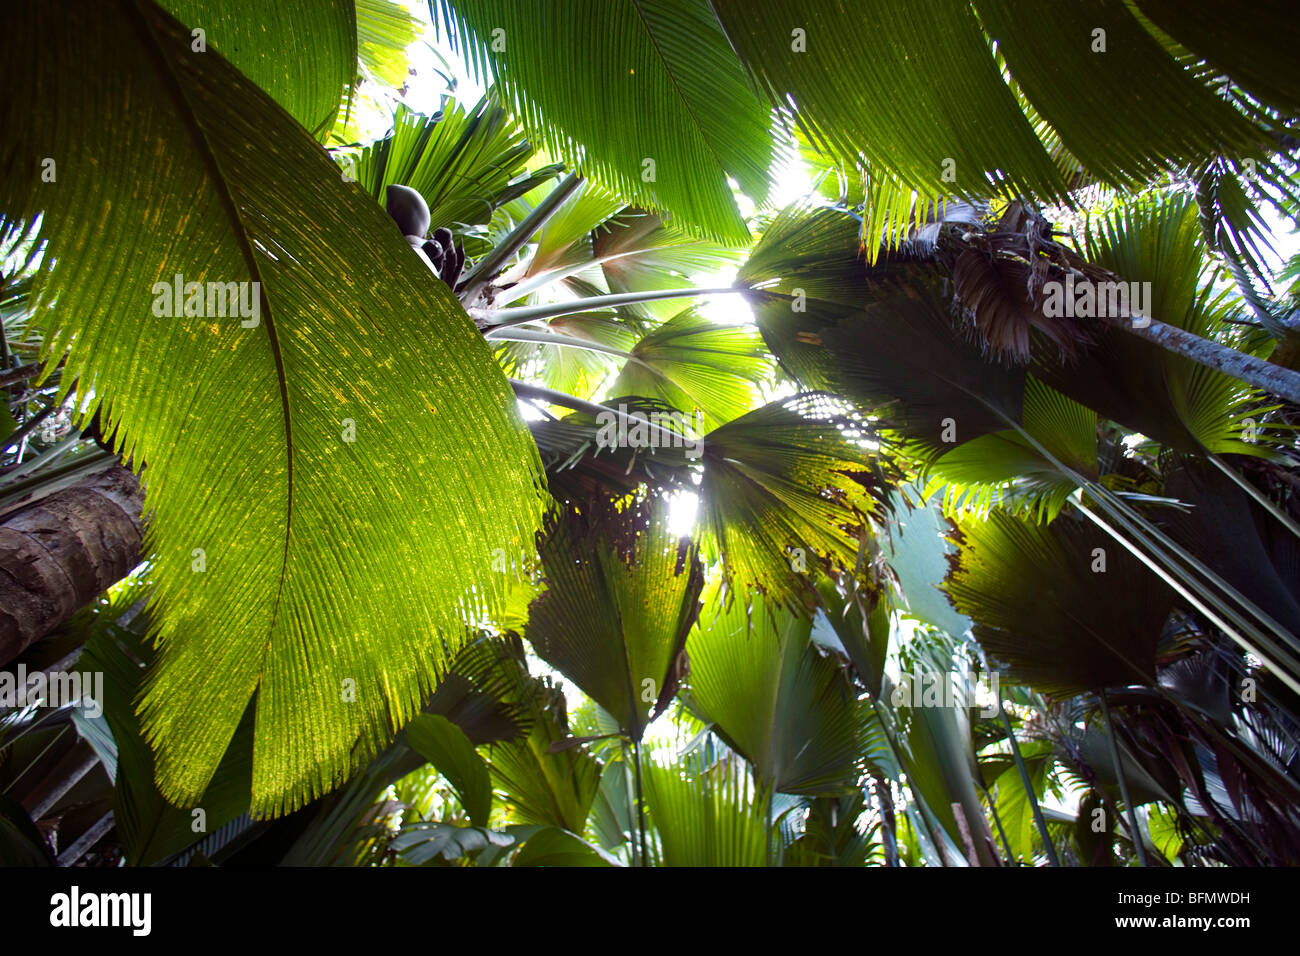 Coco De Mer High Resolution Stock Photography and Images - Alamy